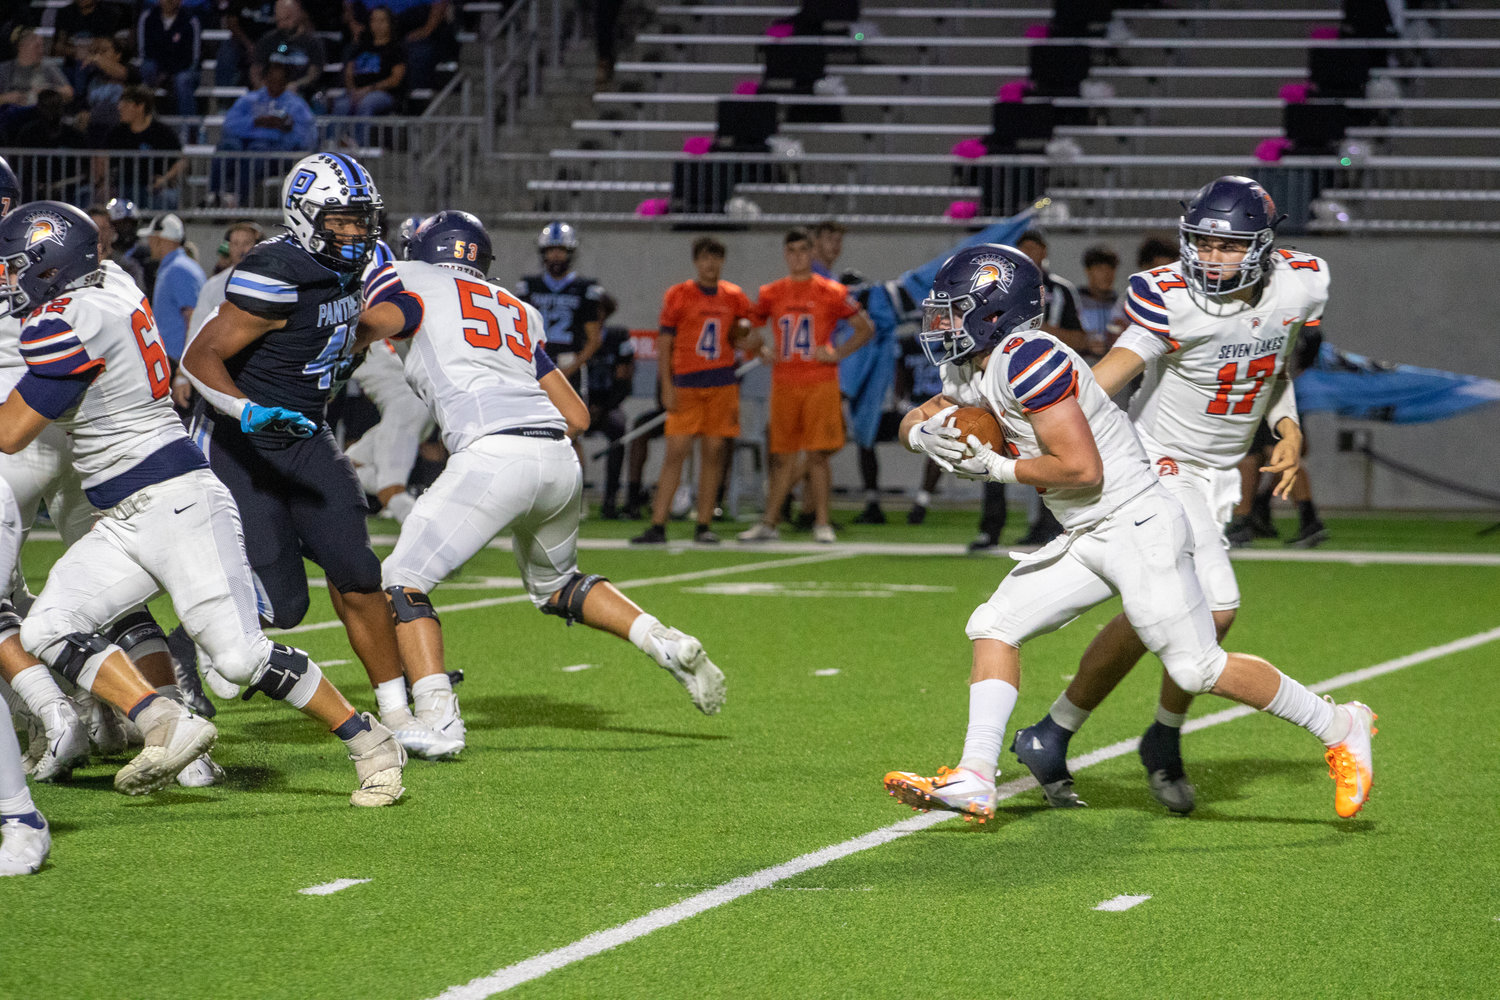 Seven Lakes Barrett Hudson takes a handoff during Thursday's game between Paetow and Seven Lakes at Legacy Stadium.